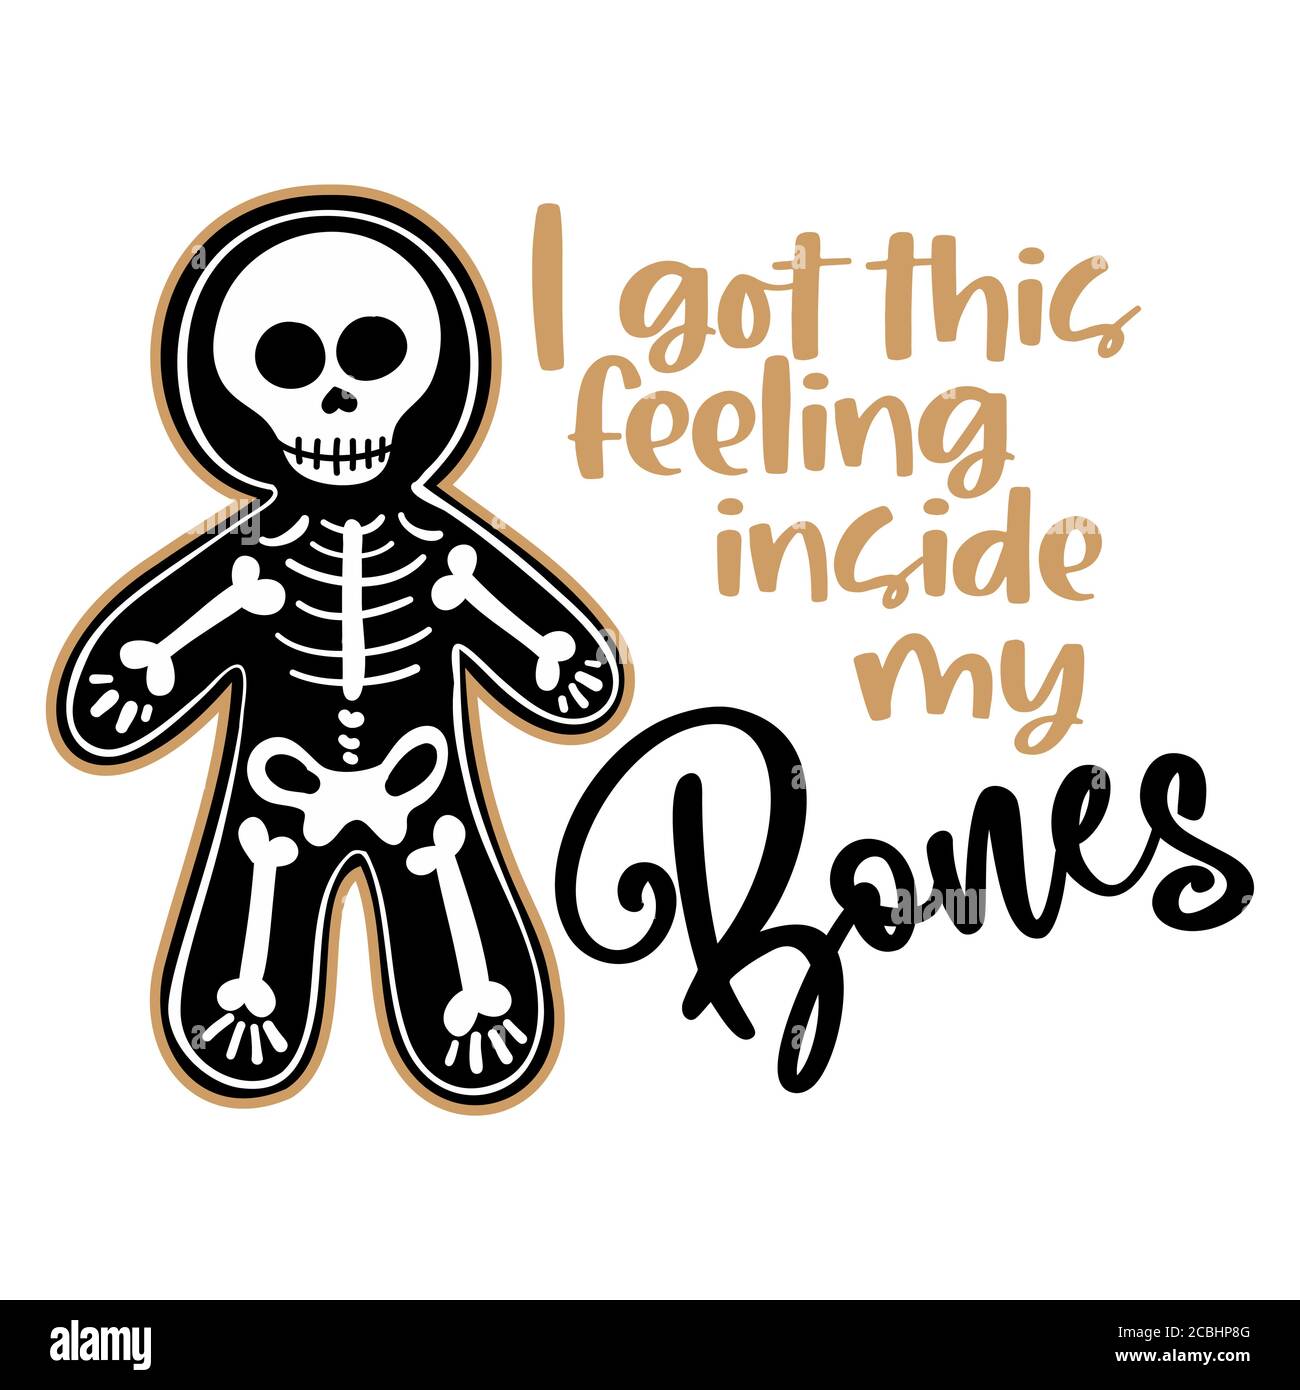 I got this feeling inside my Bones - Halloween skeleton gingerbread man labels design. Hand drawn isolated emblem with quote. Halloween party posters, Stock Vector